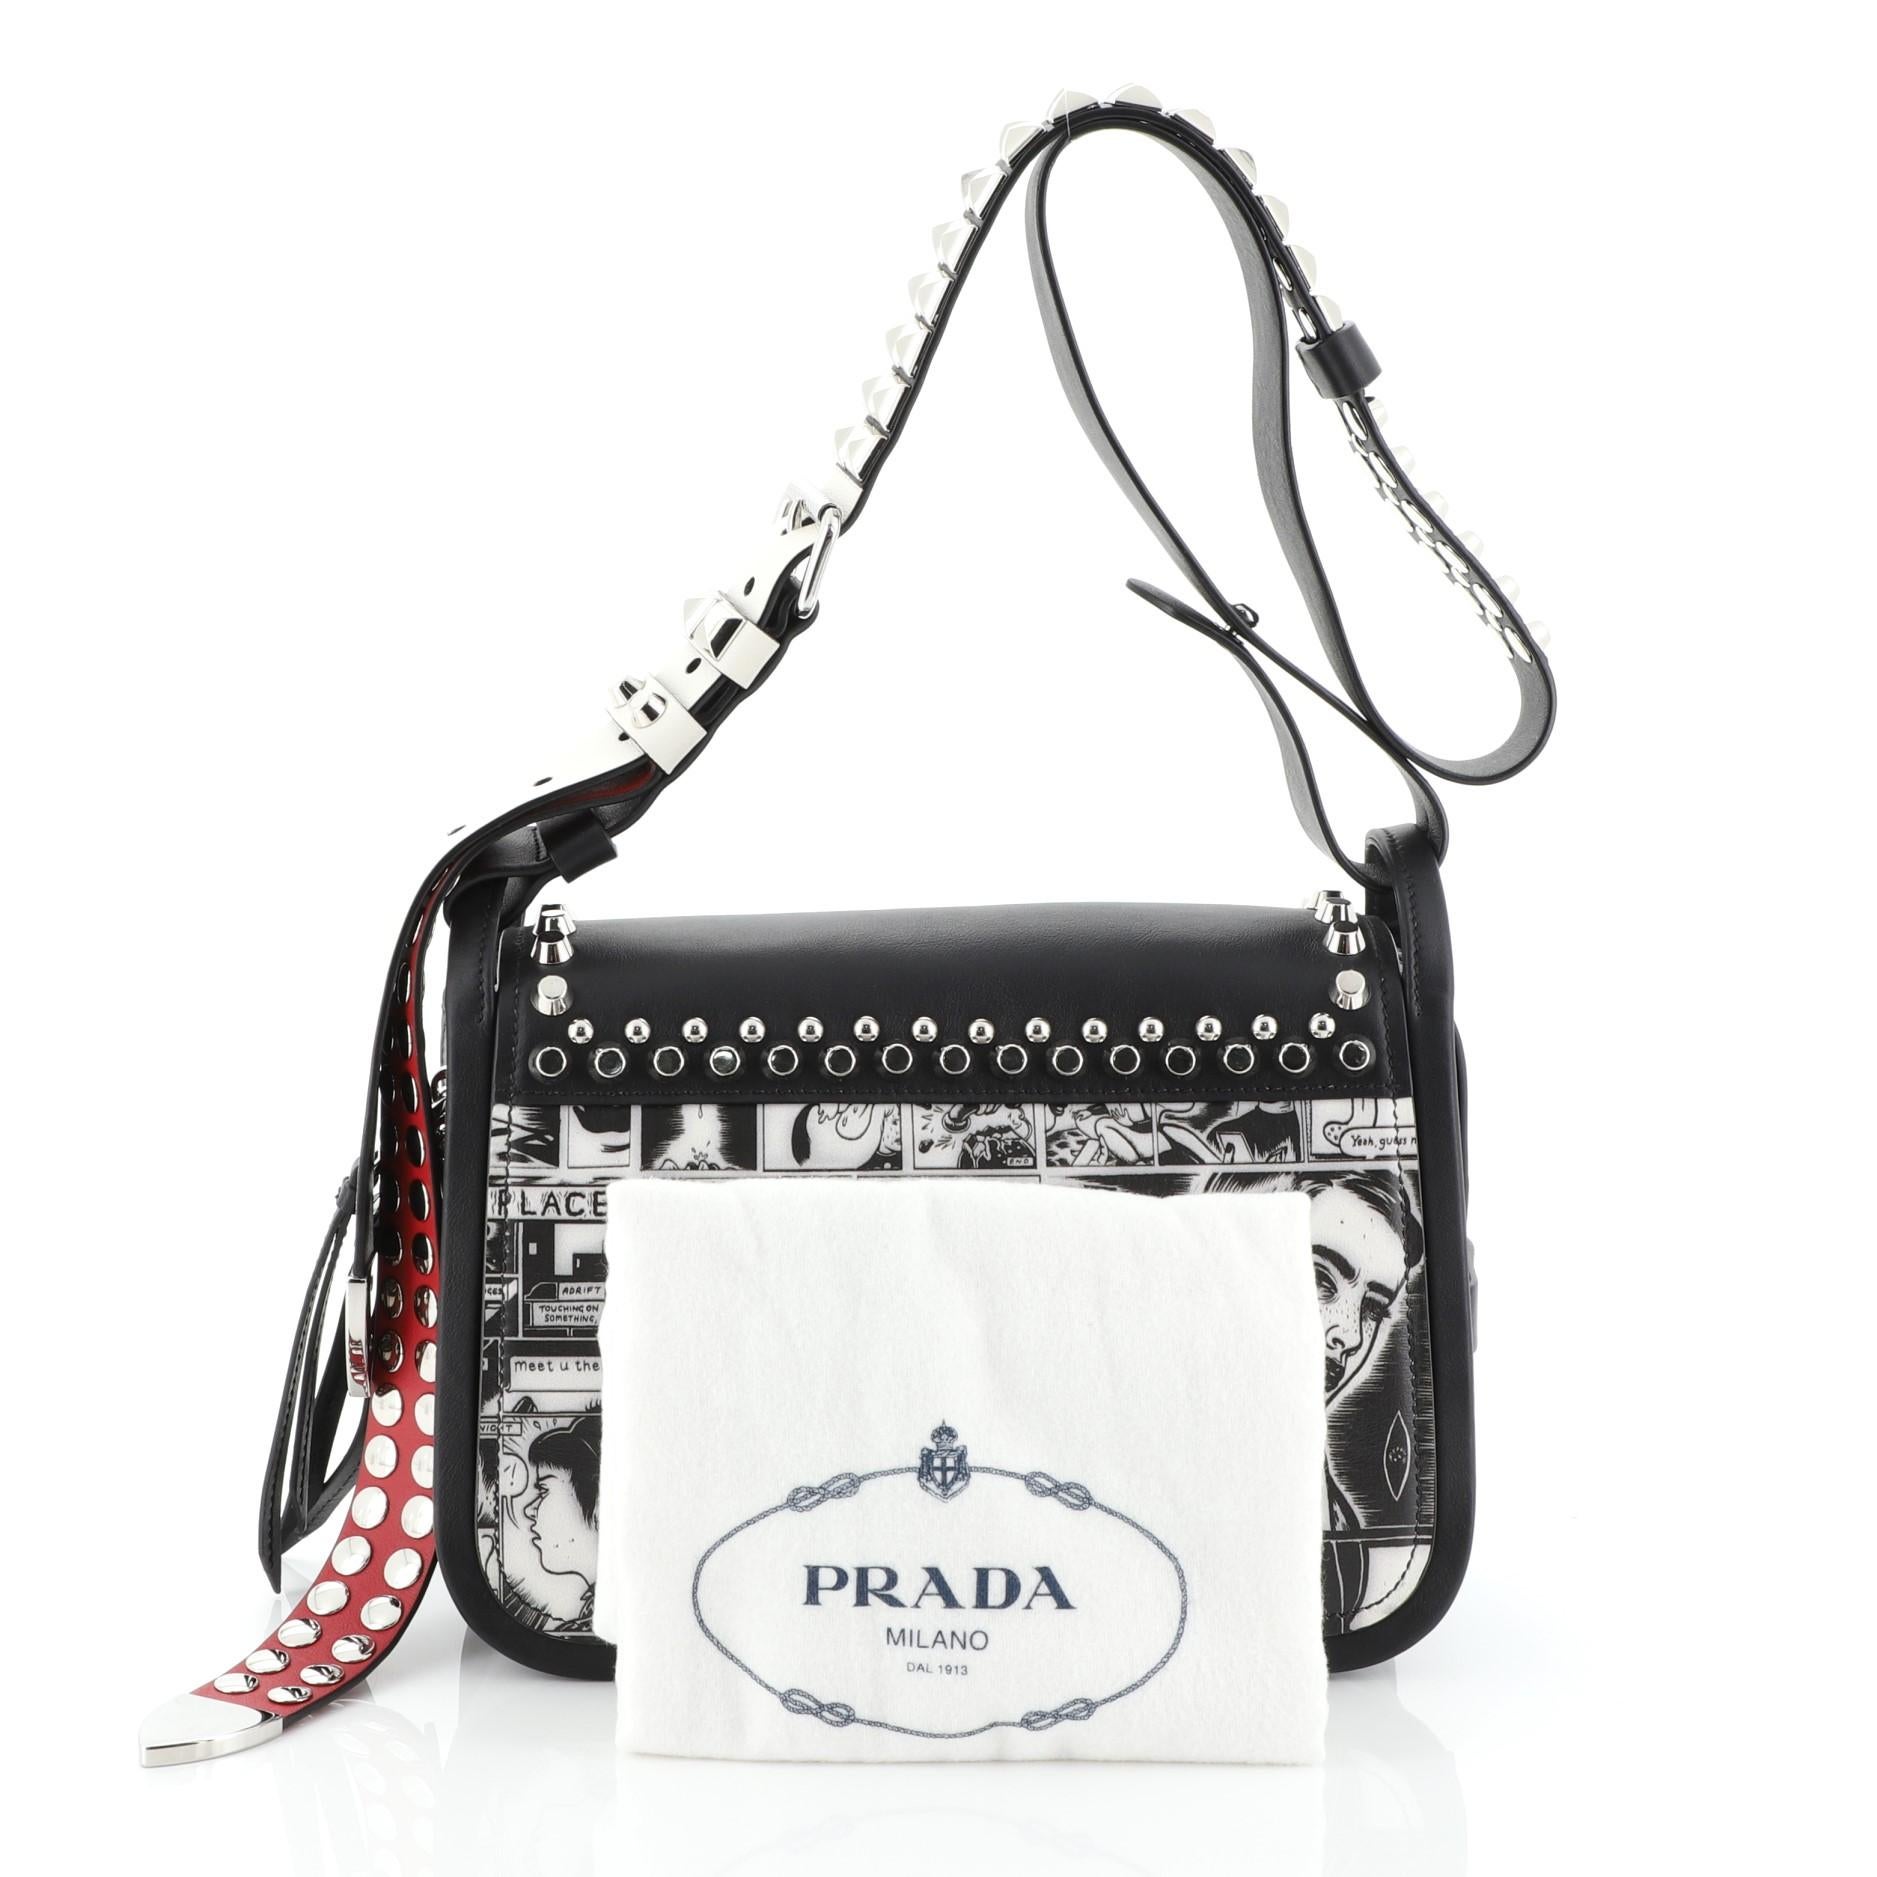 This Prada Concept Flap Shoulder Bag Studded Printed Leather Medium, crafted from black printed leather, features adjustable leather strap, stud detailing and silver-tone hardware. Its flap with magnetic closure opens to a black leather and fabric